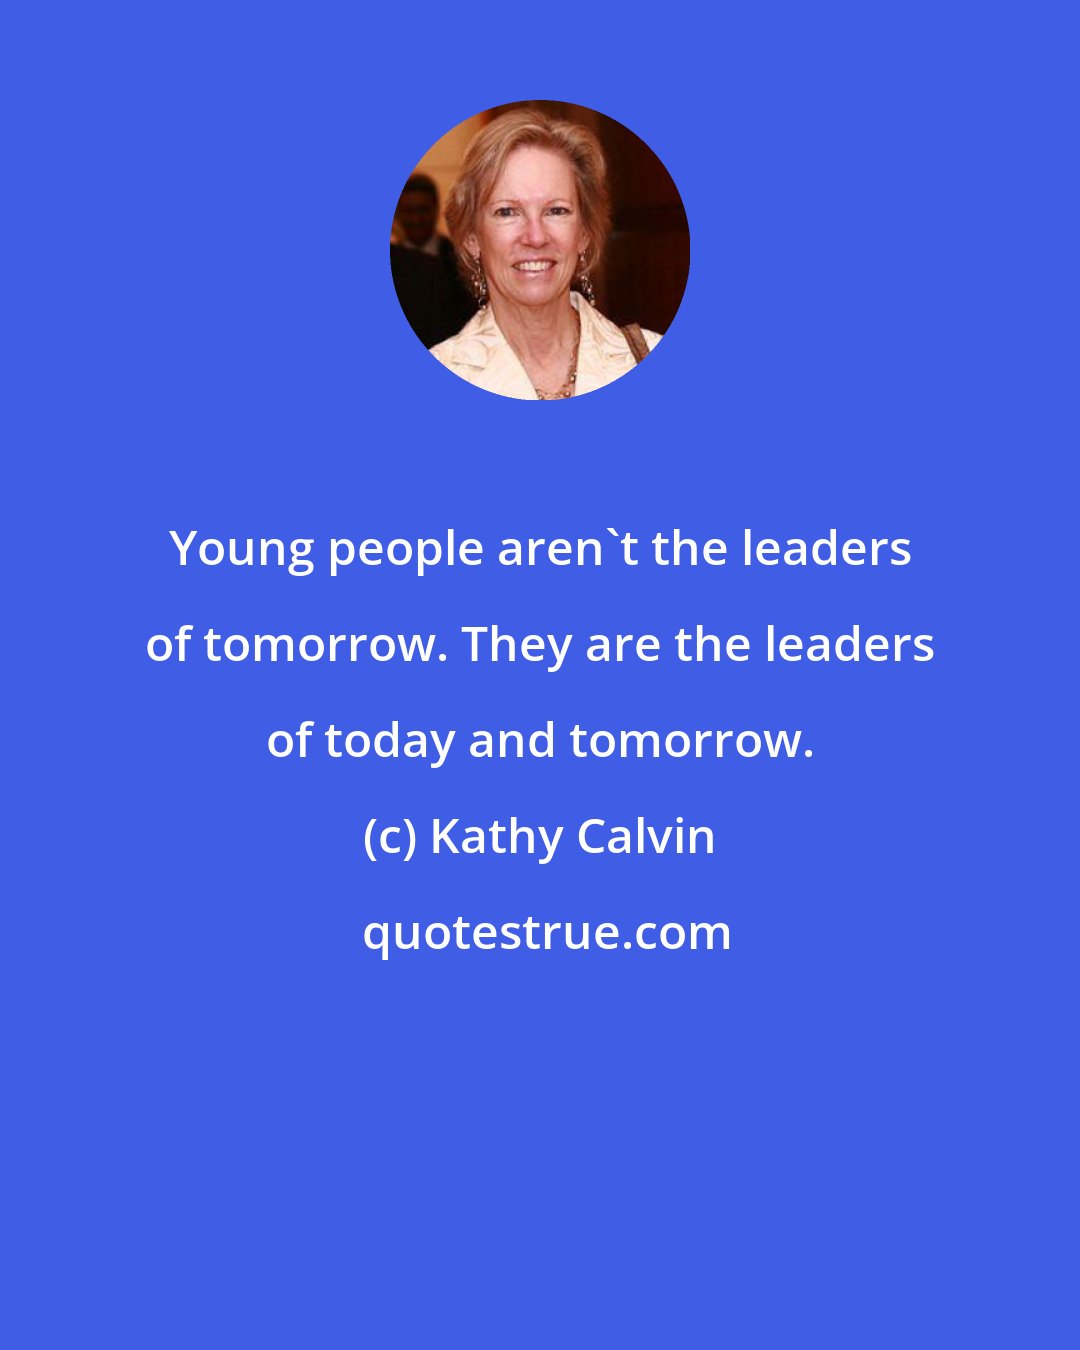 Kathy Calvin: Young people aren't the leaders of tomorrow. They are the leaders of today and tomorrow.